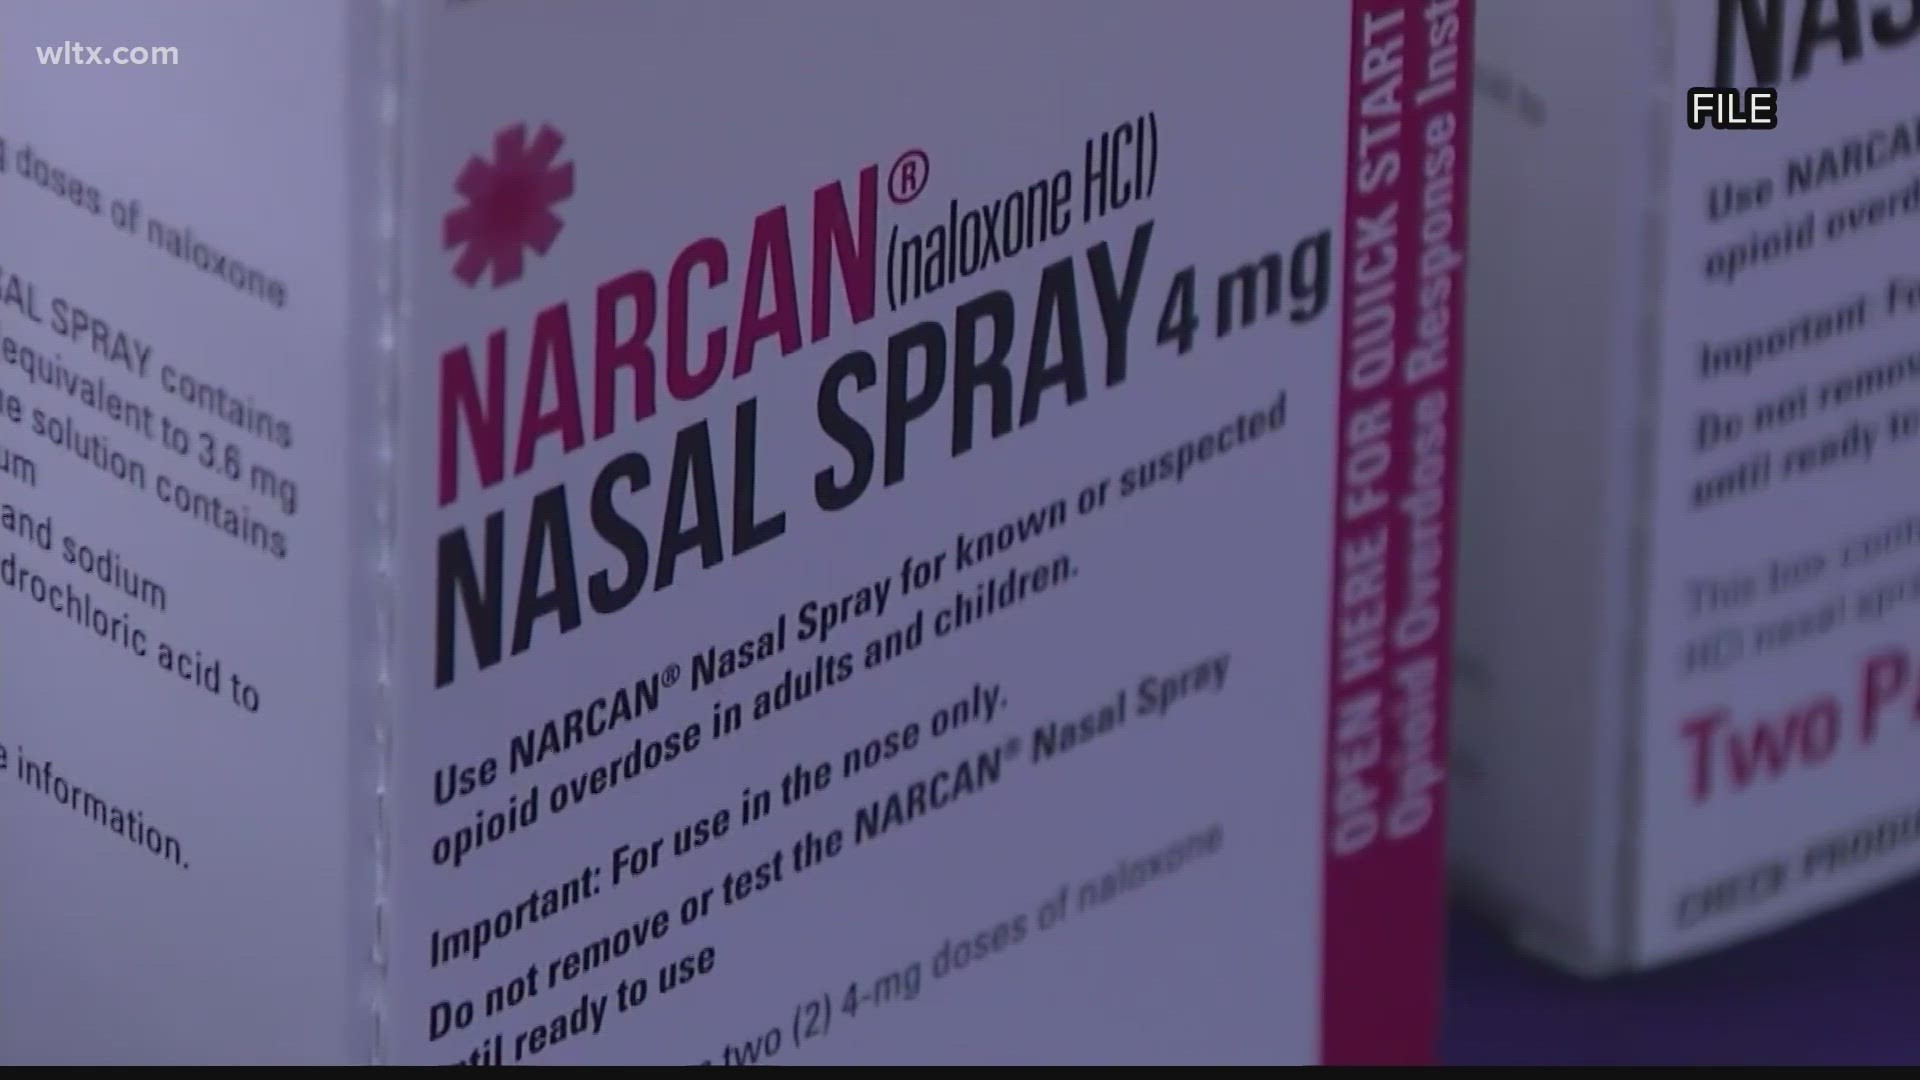 Last week the FDA approved the first ever over-the-counter Narcan spray.